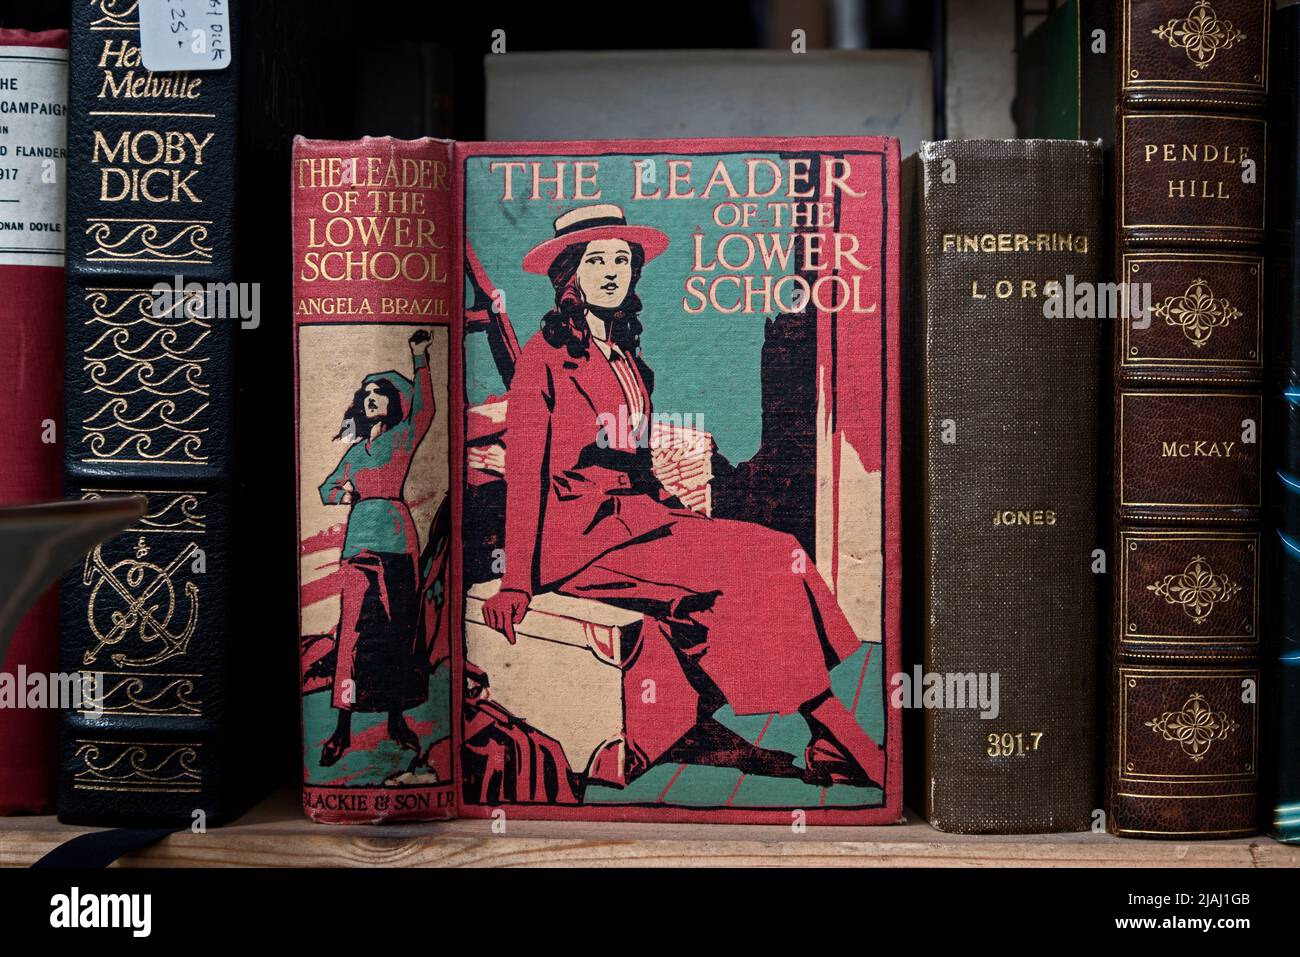 Vintage copy of 'The Leader of the Lower School' by Angela Brazil in the window of a secondhand bookseller in Edinburgh, Scotland, UK. Stock Photo